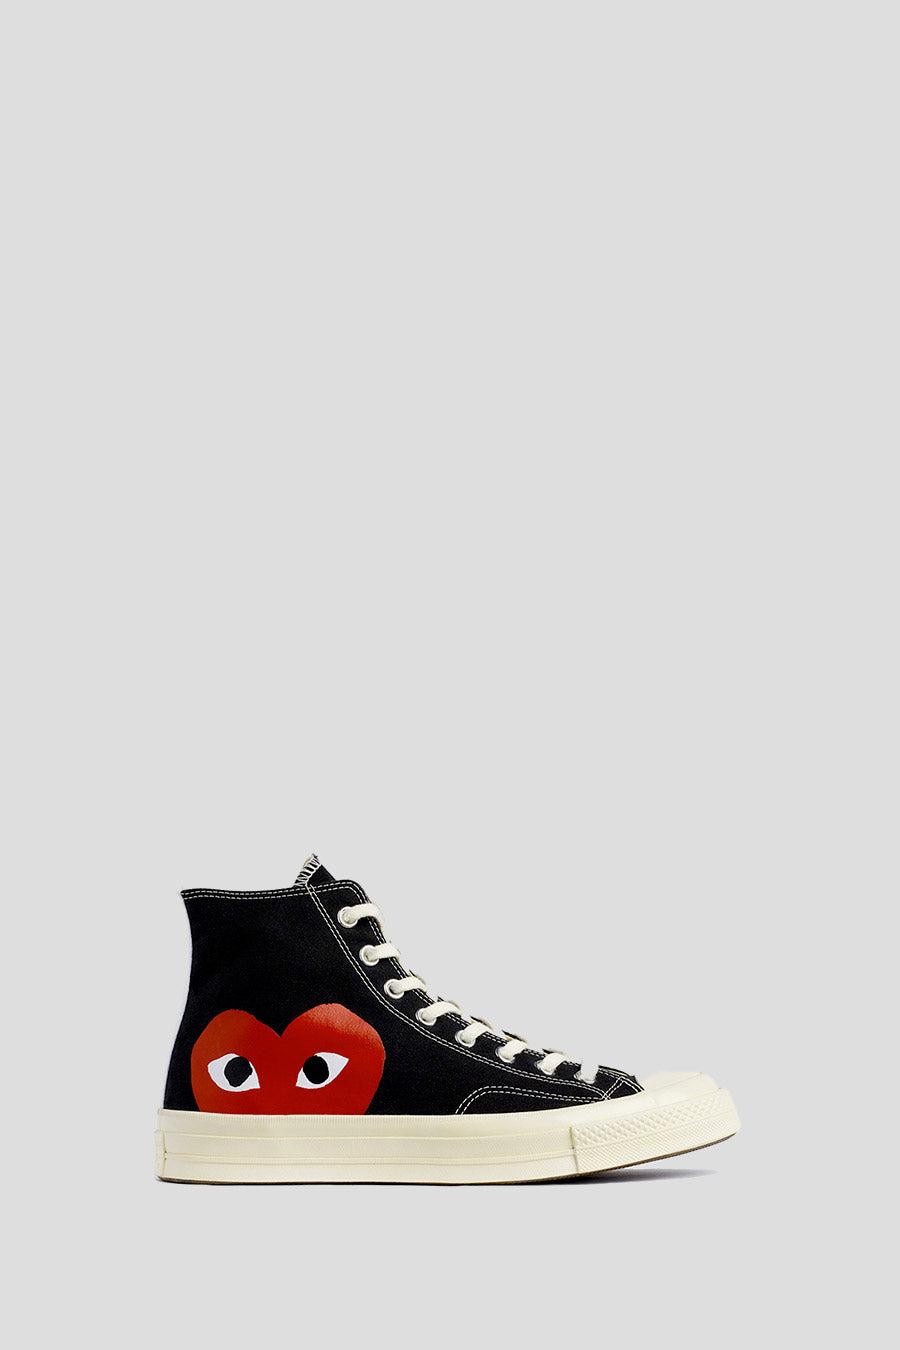 Comme des garçons PLAY - CONVERSE CT70 SNEAKERS BLACK, WHITE AND HIGH RISK RED - LE LABO STORE